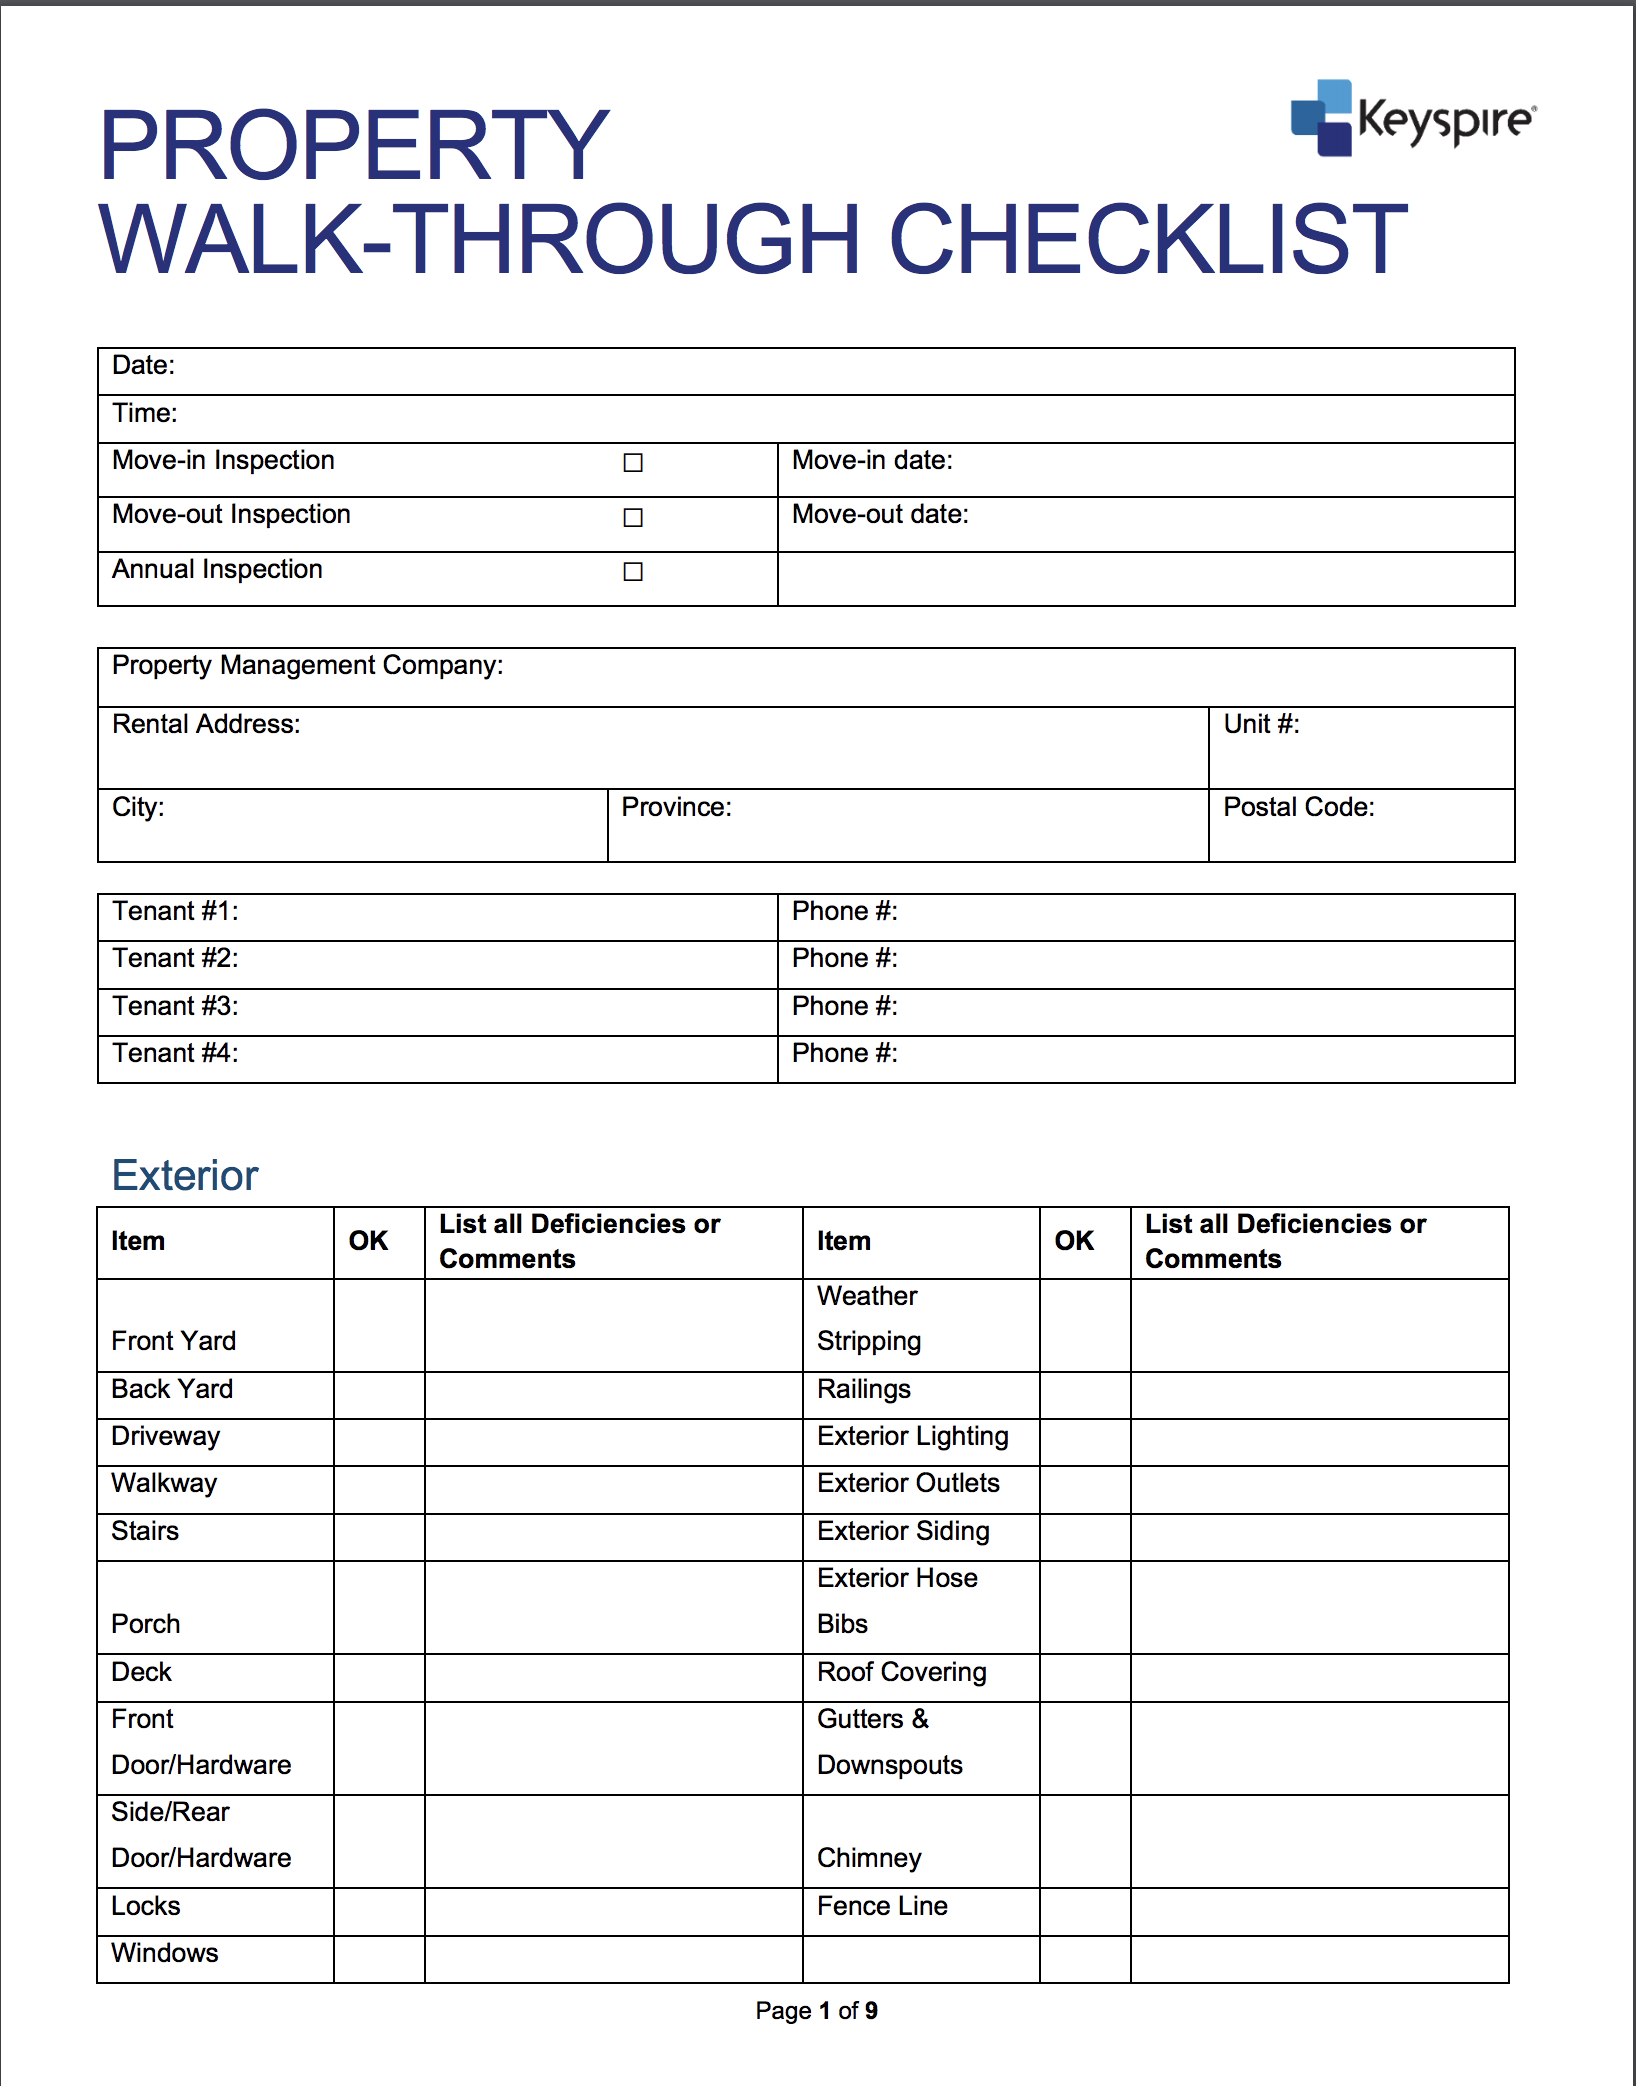 you-asked-for-it-property-walk-through-checklist